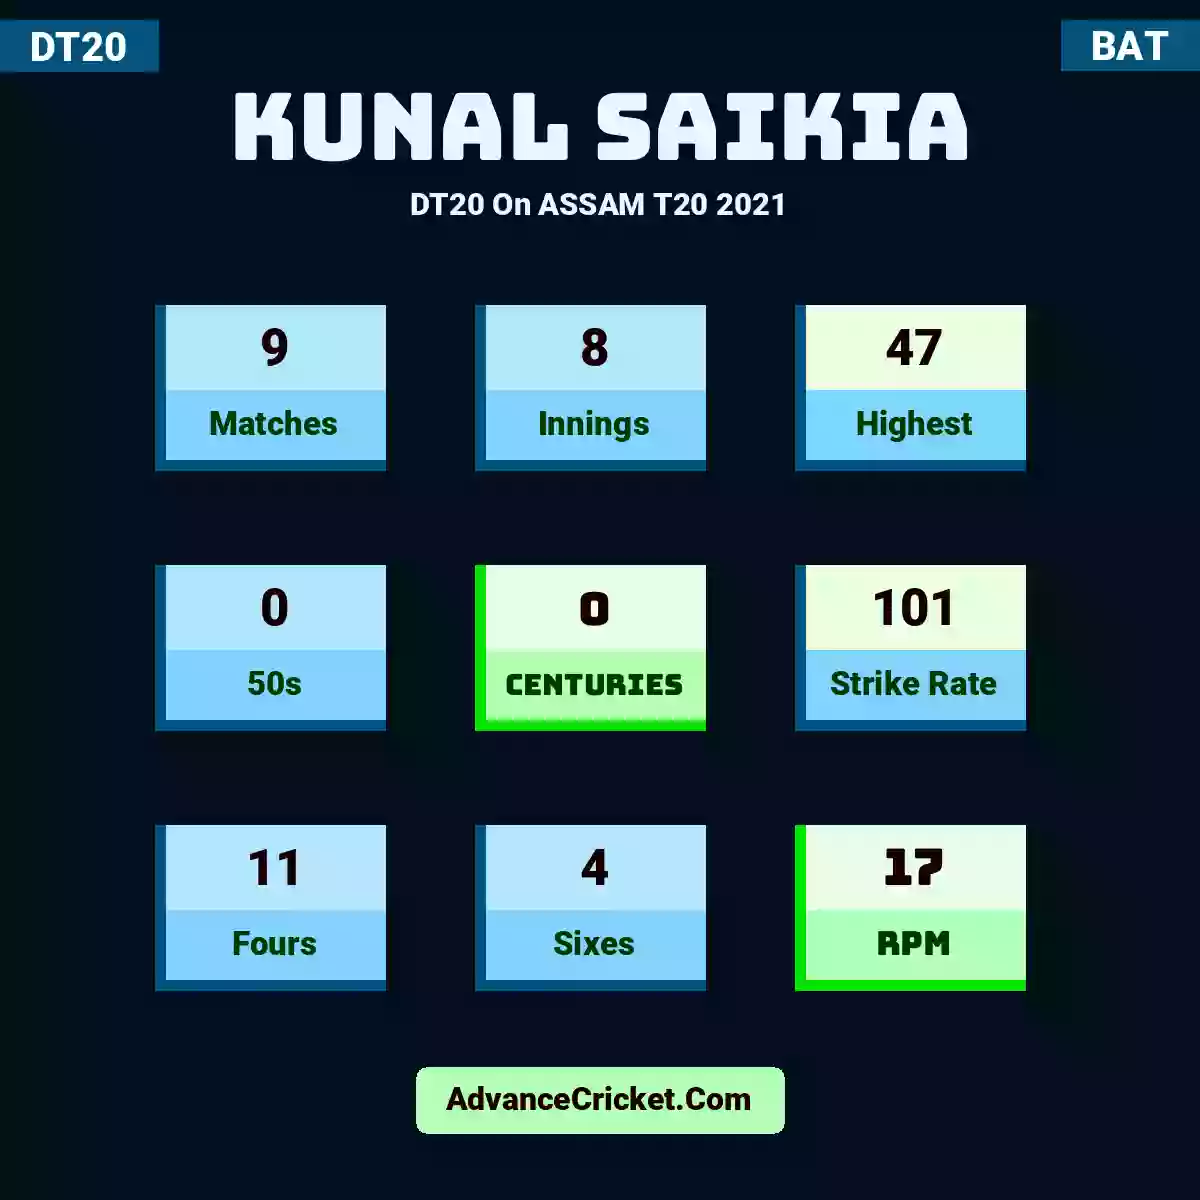 Kunal Saikia DT20  On ASSAM T20 2021, Kunal Saikia played 9 matches, scored 47 runs as highest, 0 half-centuries, and 0 centuries, with a strike rate of 101. K.Saikia hit 11 fours and 4 sixes, with an RPM of 17.